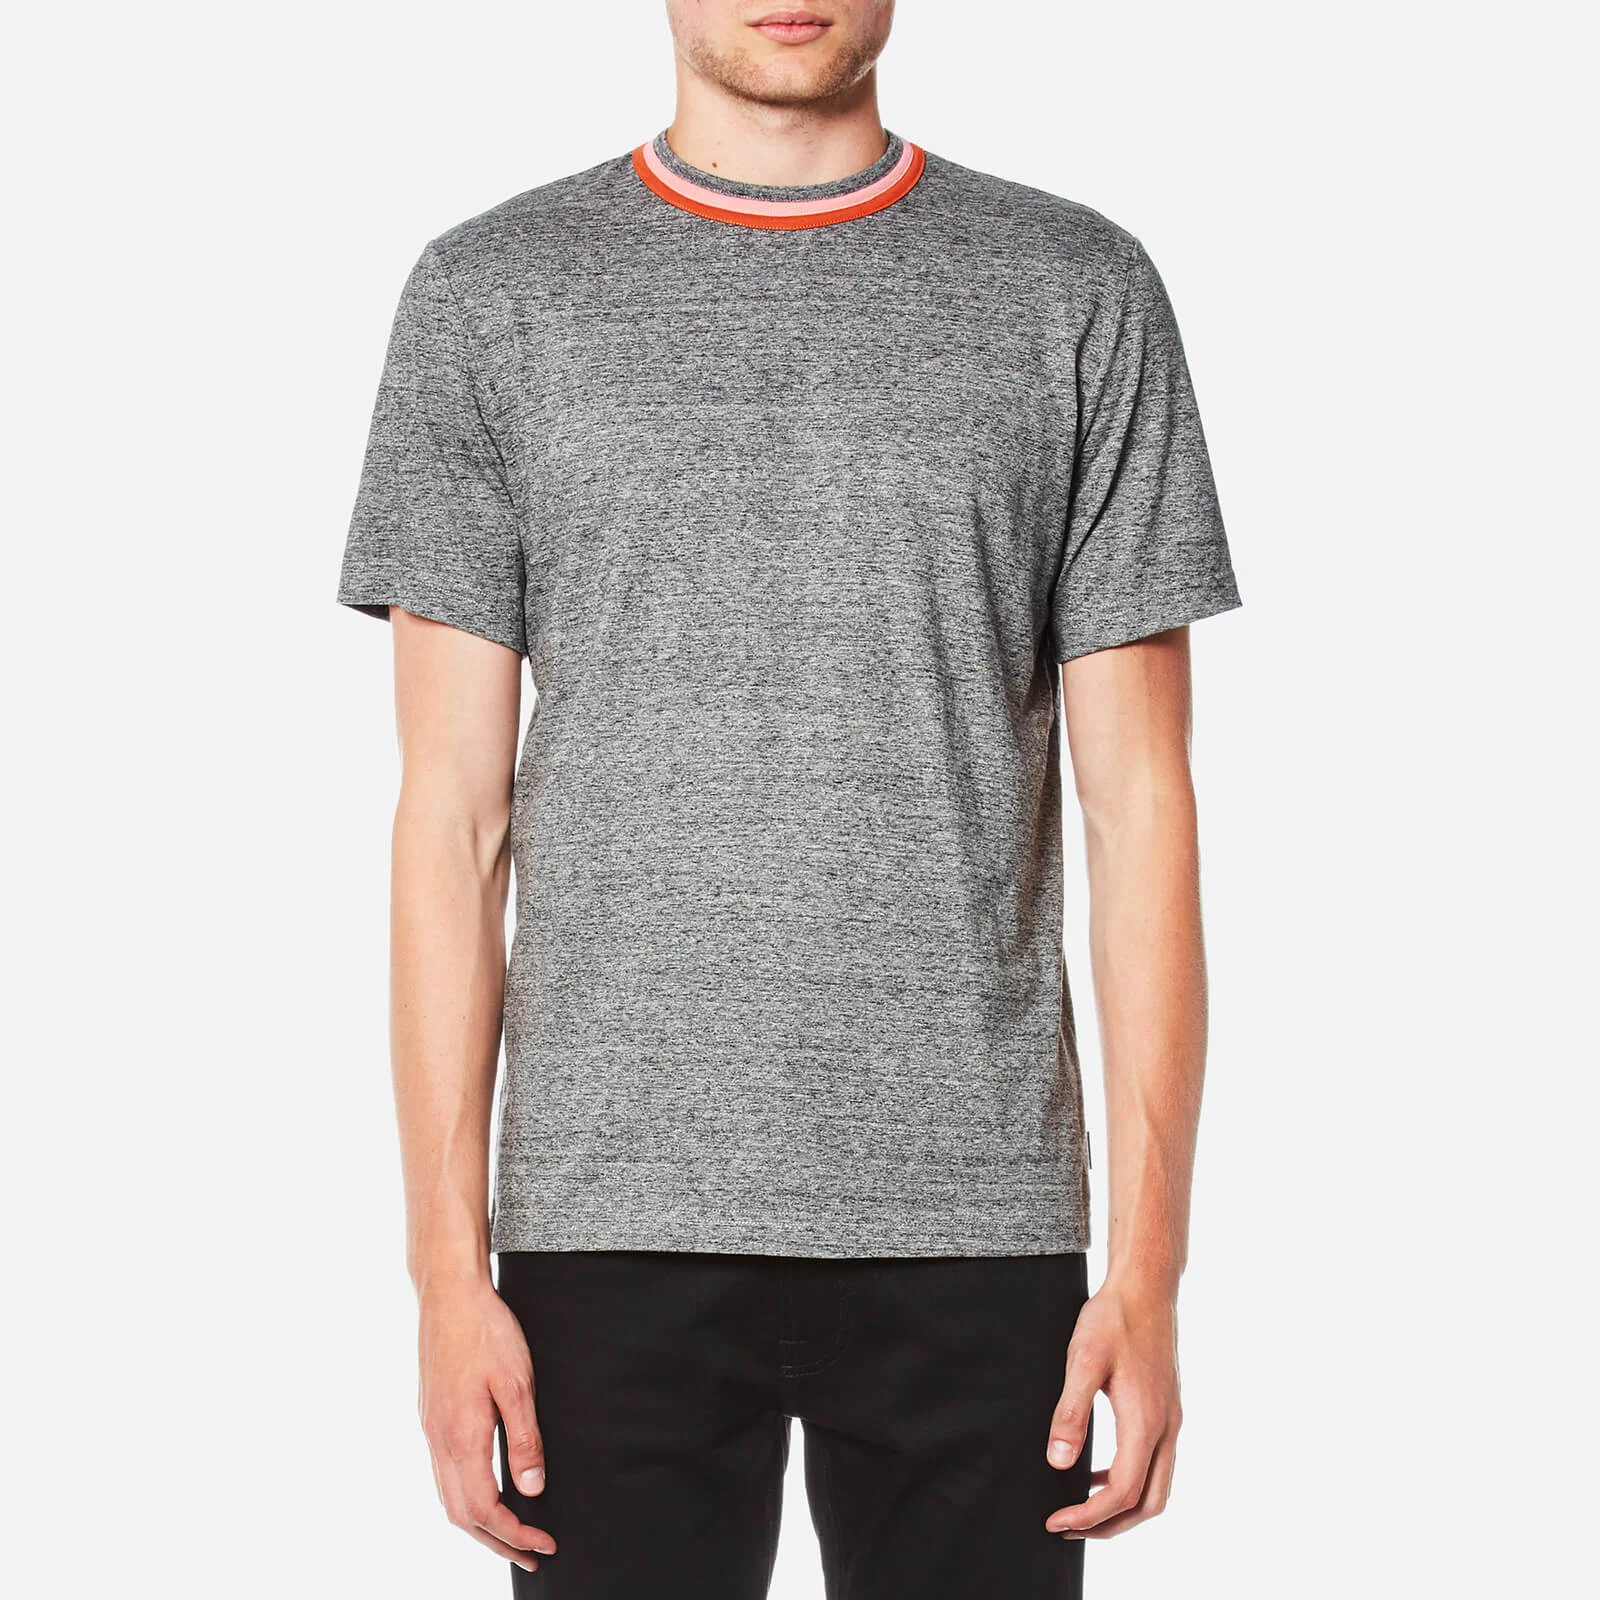 PS by Paul Smith Men's Pima Regular Fit T-Shirt - Grey/Pink Image 1